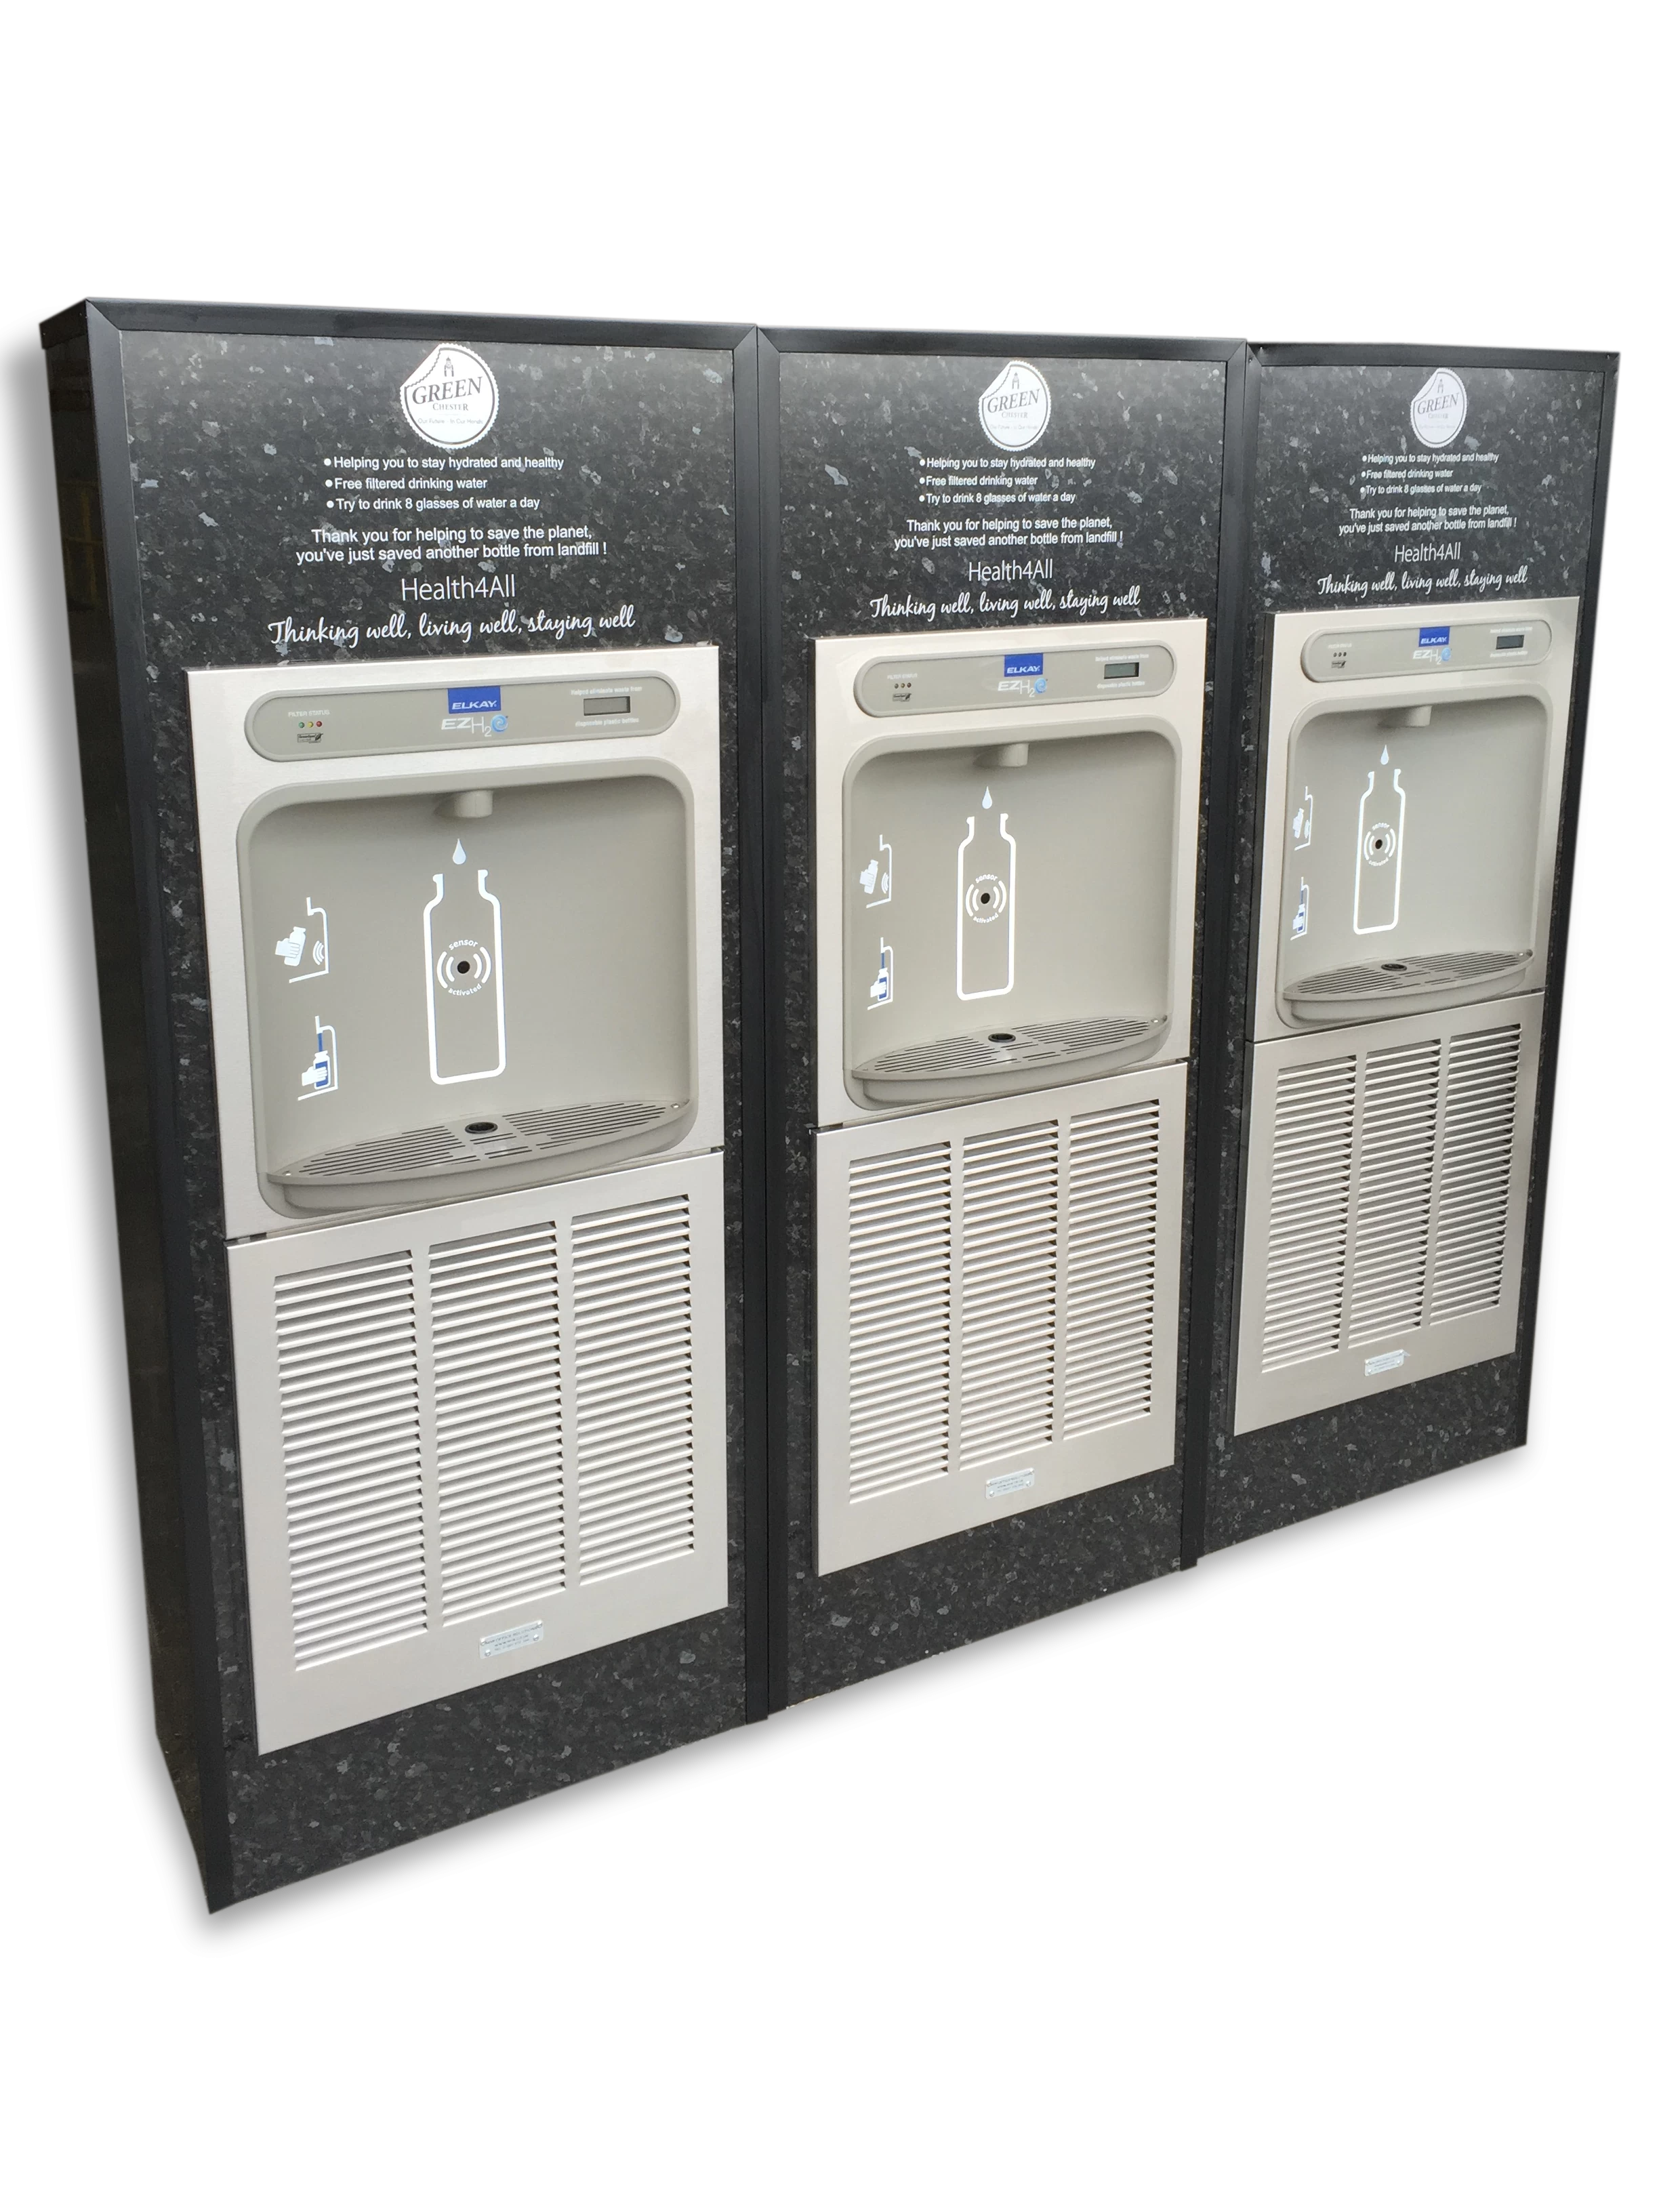 New Wras Approved MIW Bottle Refill Stations 